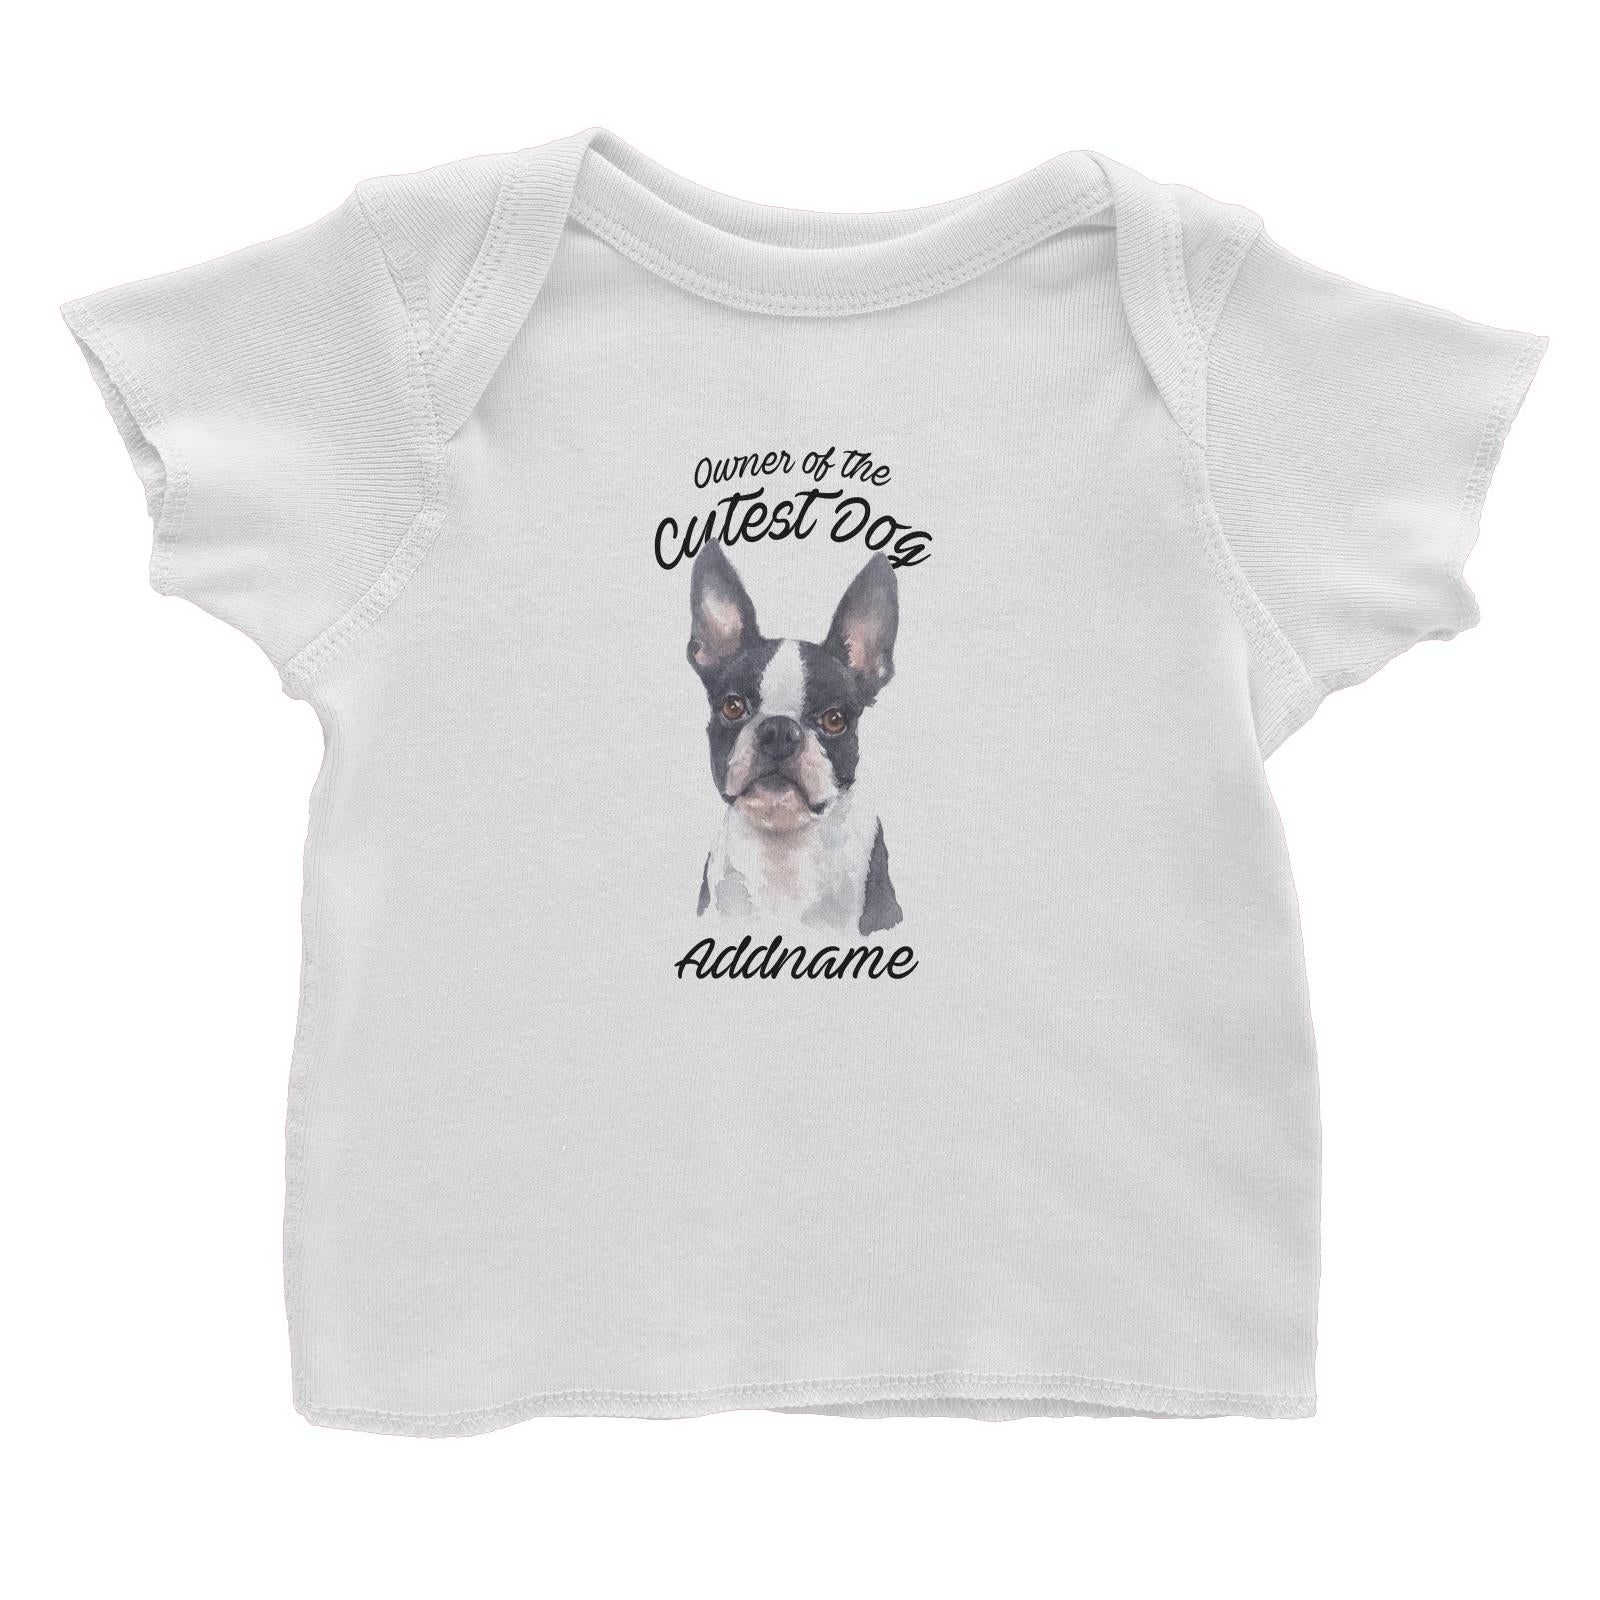 Watercolor Dog Owner Of The Cutest Dog Boston Terrier Addname Baby T-Shirt